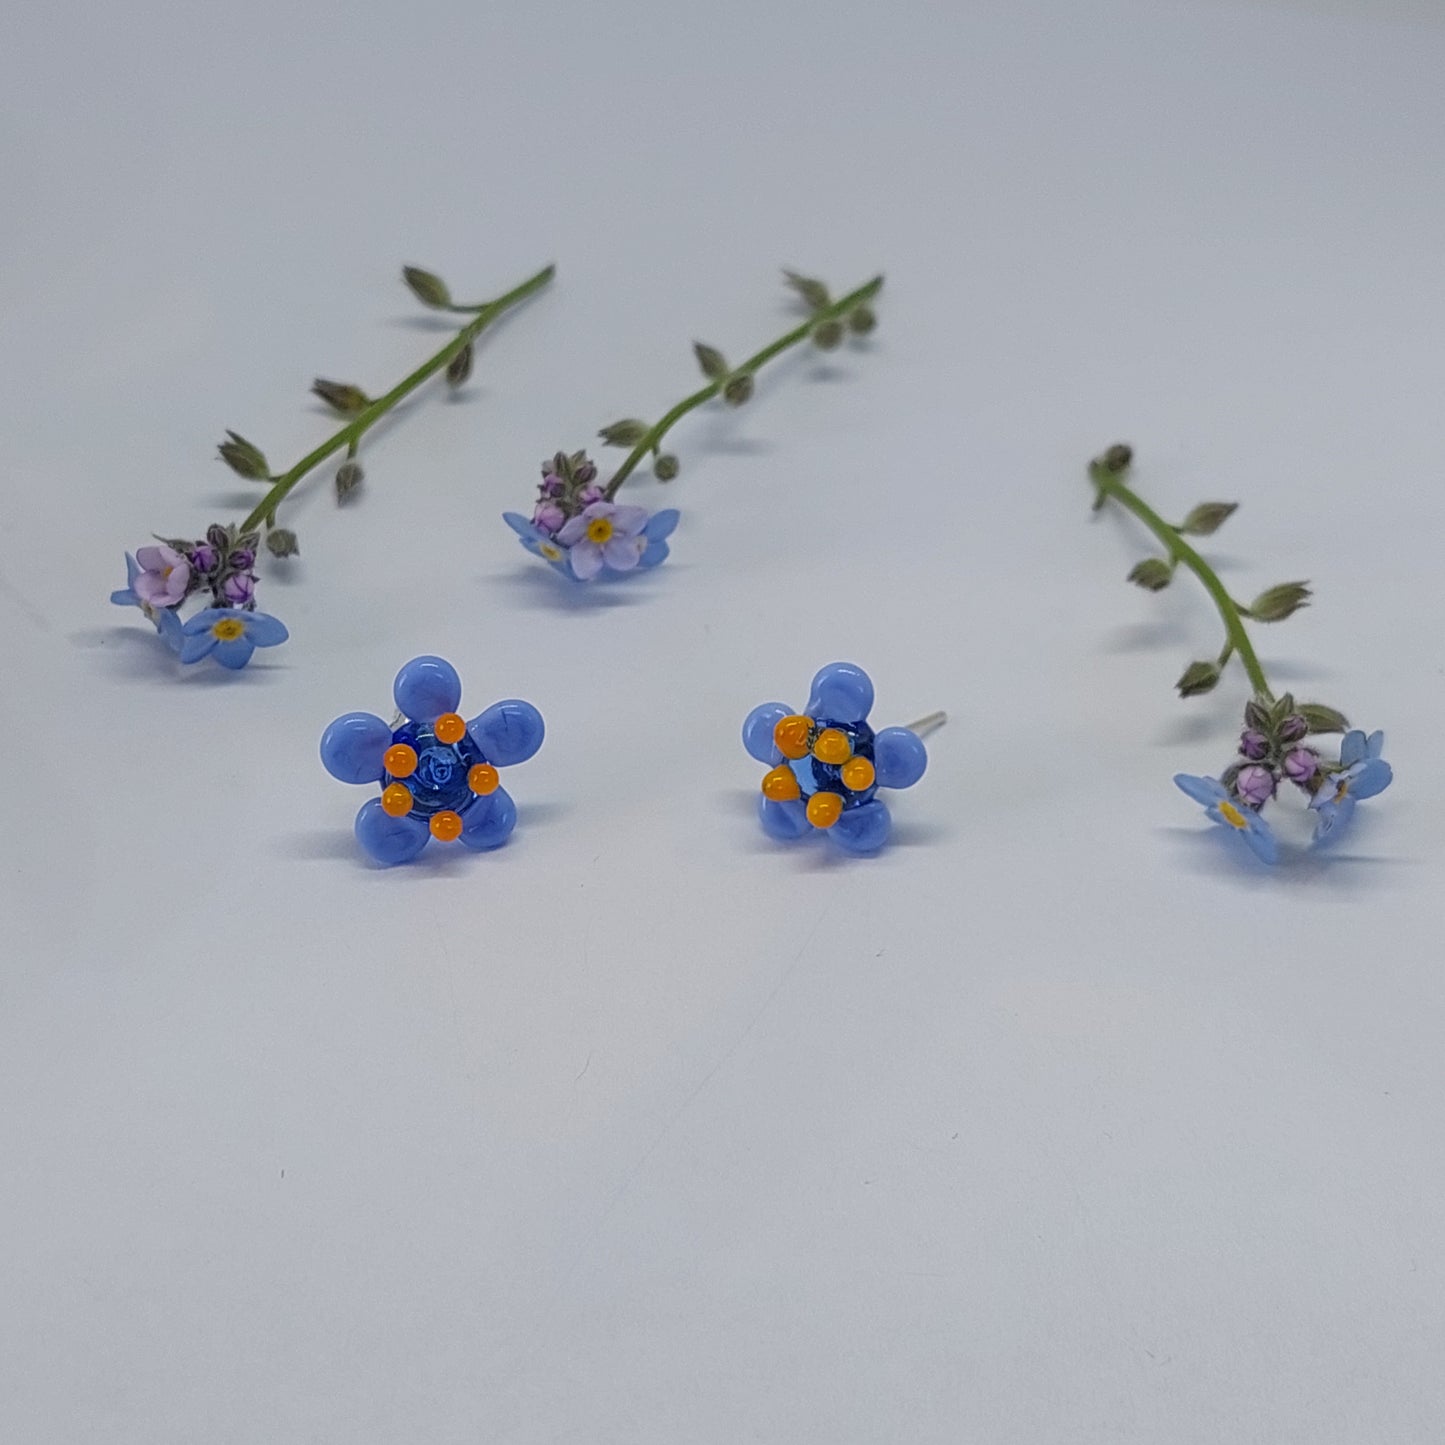 NEW!! Glass Art Forget Me Not Stud Earrings